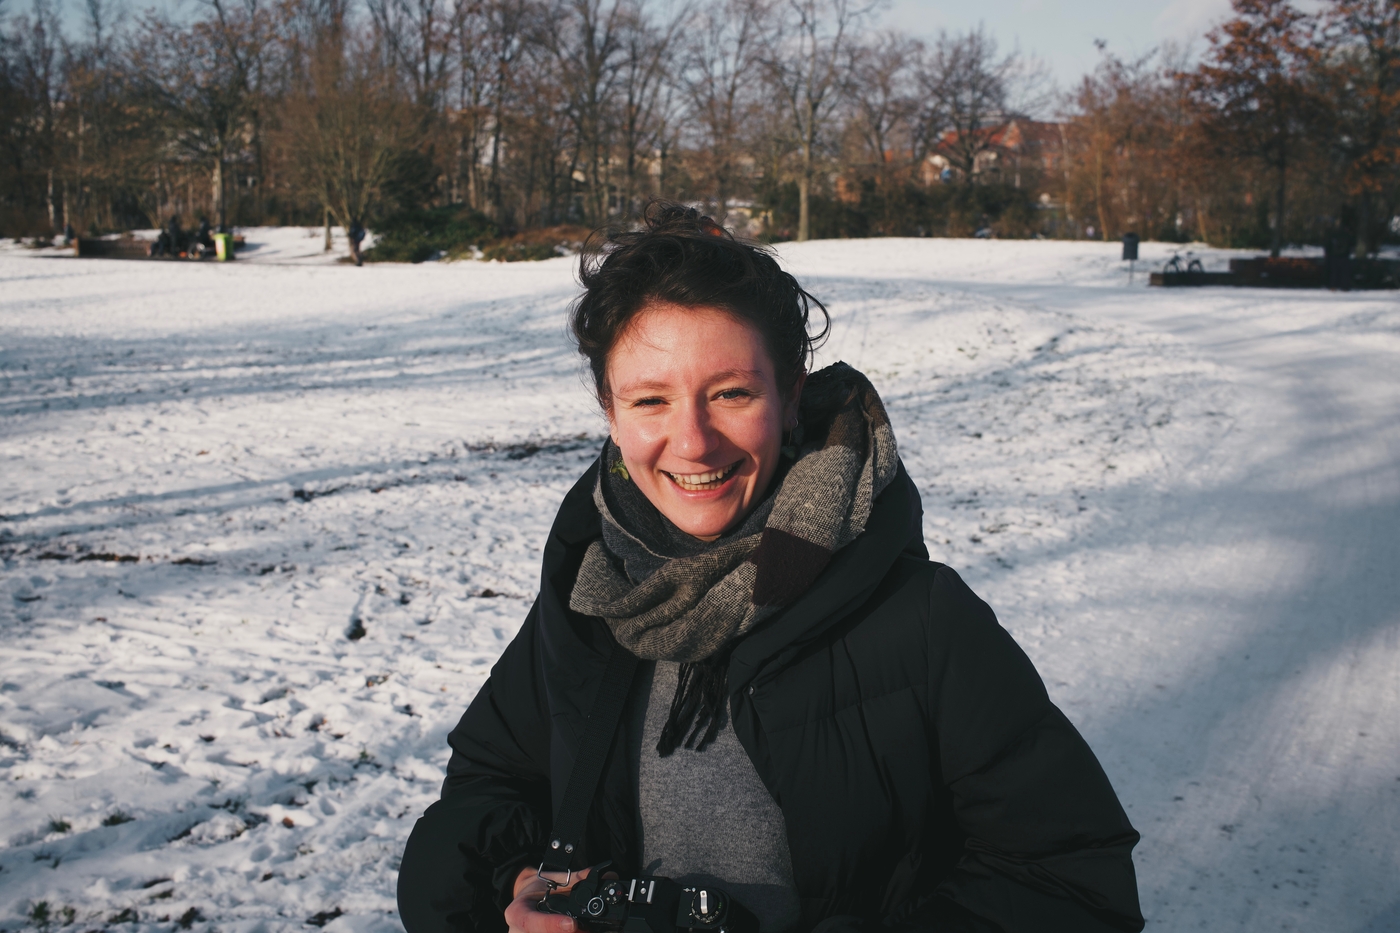 Sarah smiling in the sunshine of a snowy park